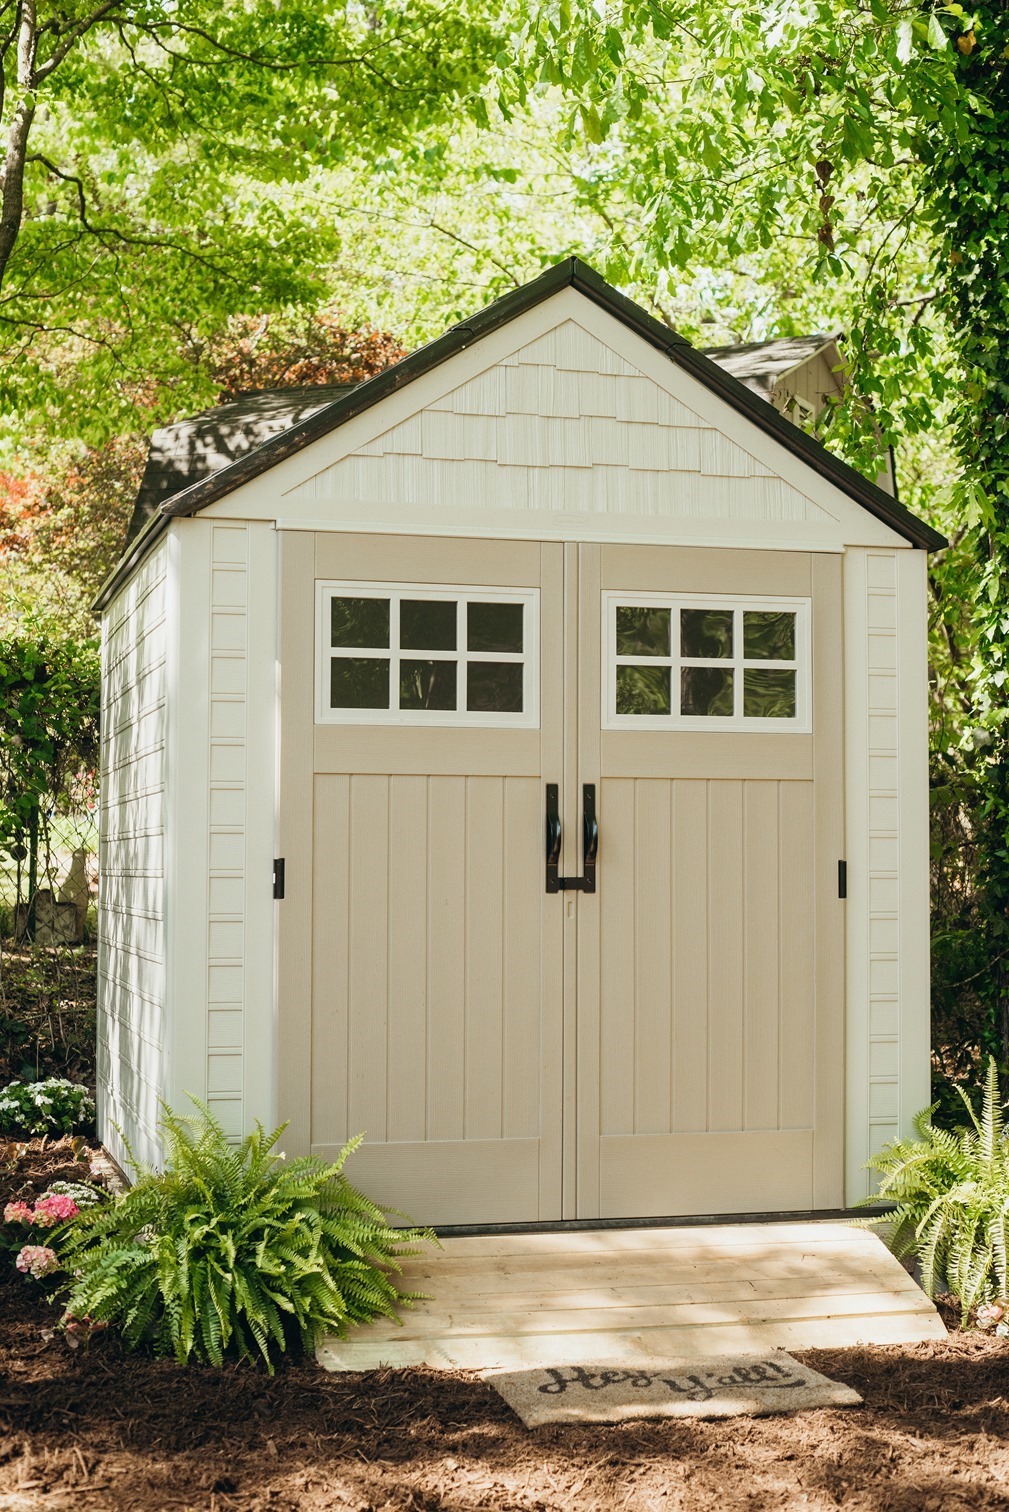 How to Build a Foundation For a Rubbermaid Storage Shed